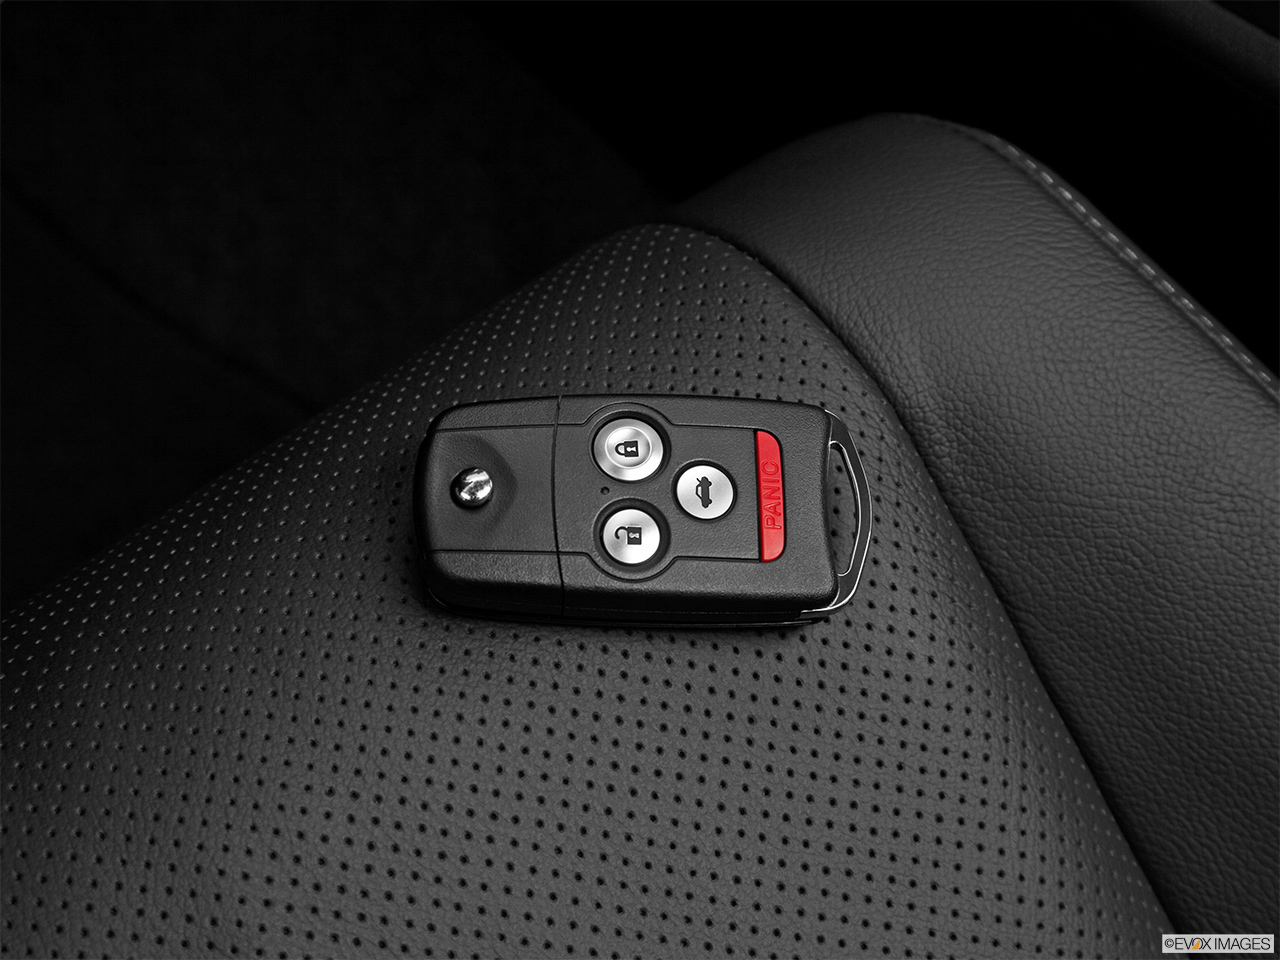 2012 Acura TSX 5-Speed Automatic Key fob on driver's seat. 